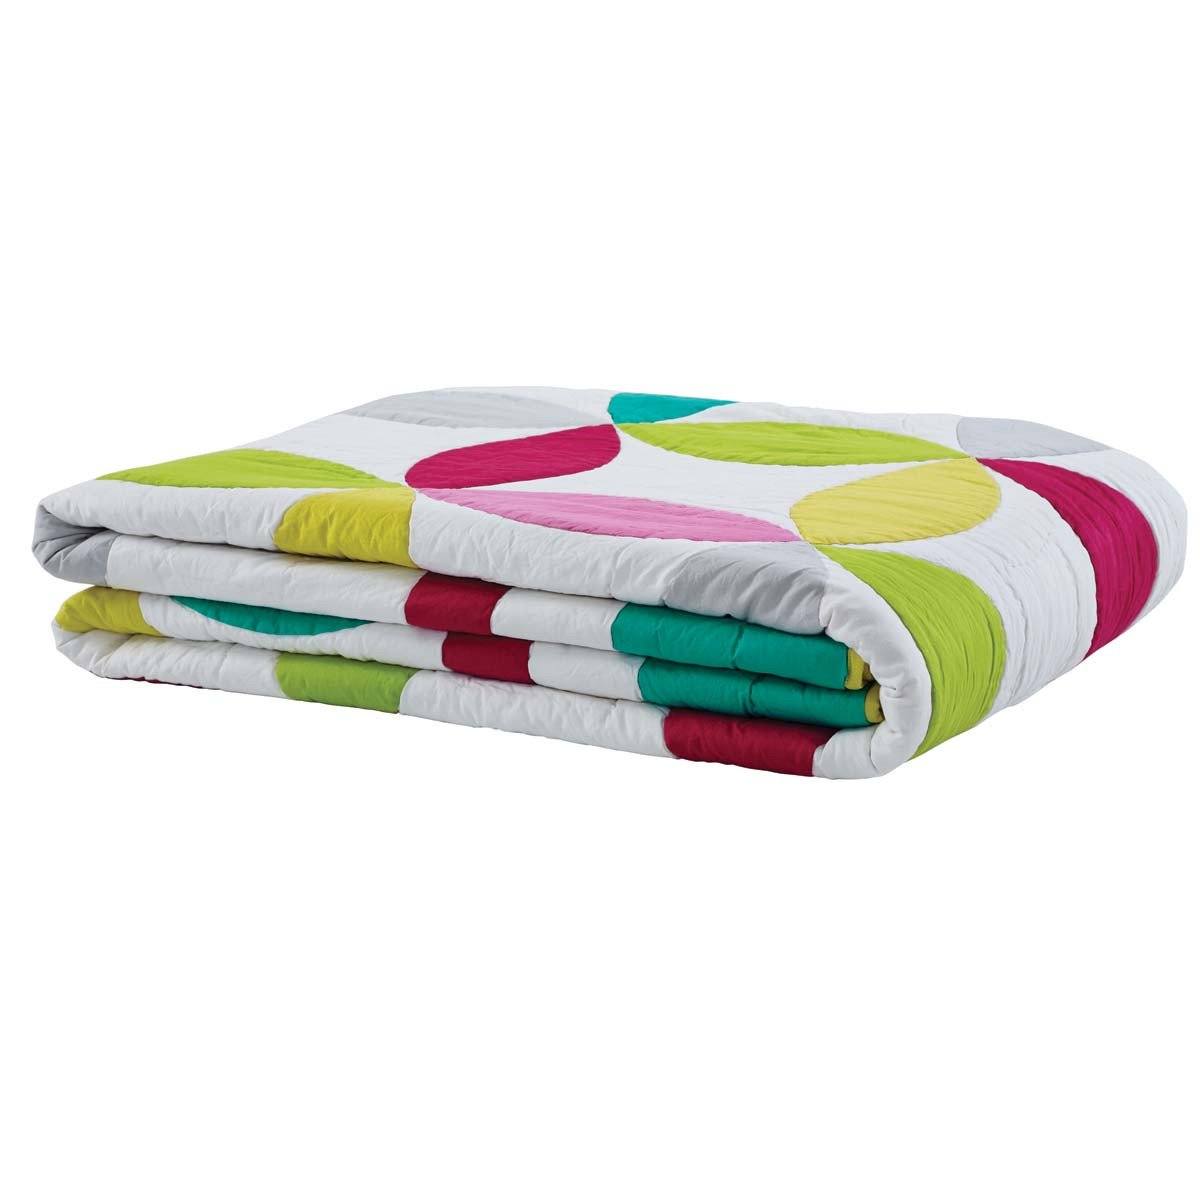 Everly King Set; Quilt 105Wx95L-2 Shams 21x37 VHC Brands folded